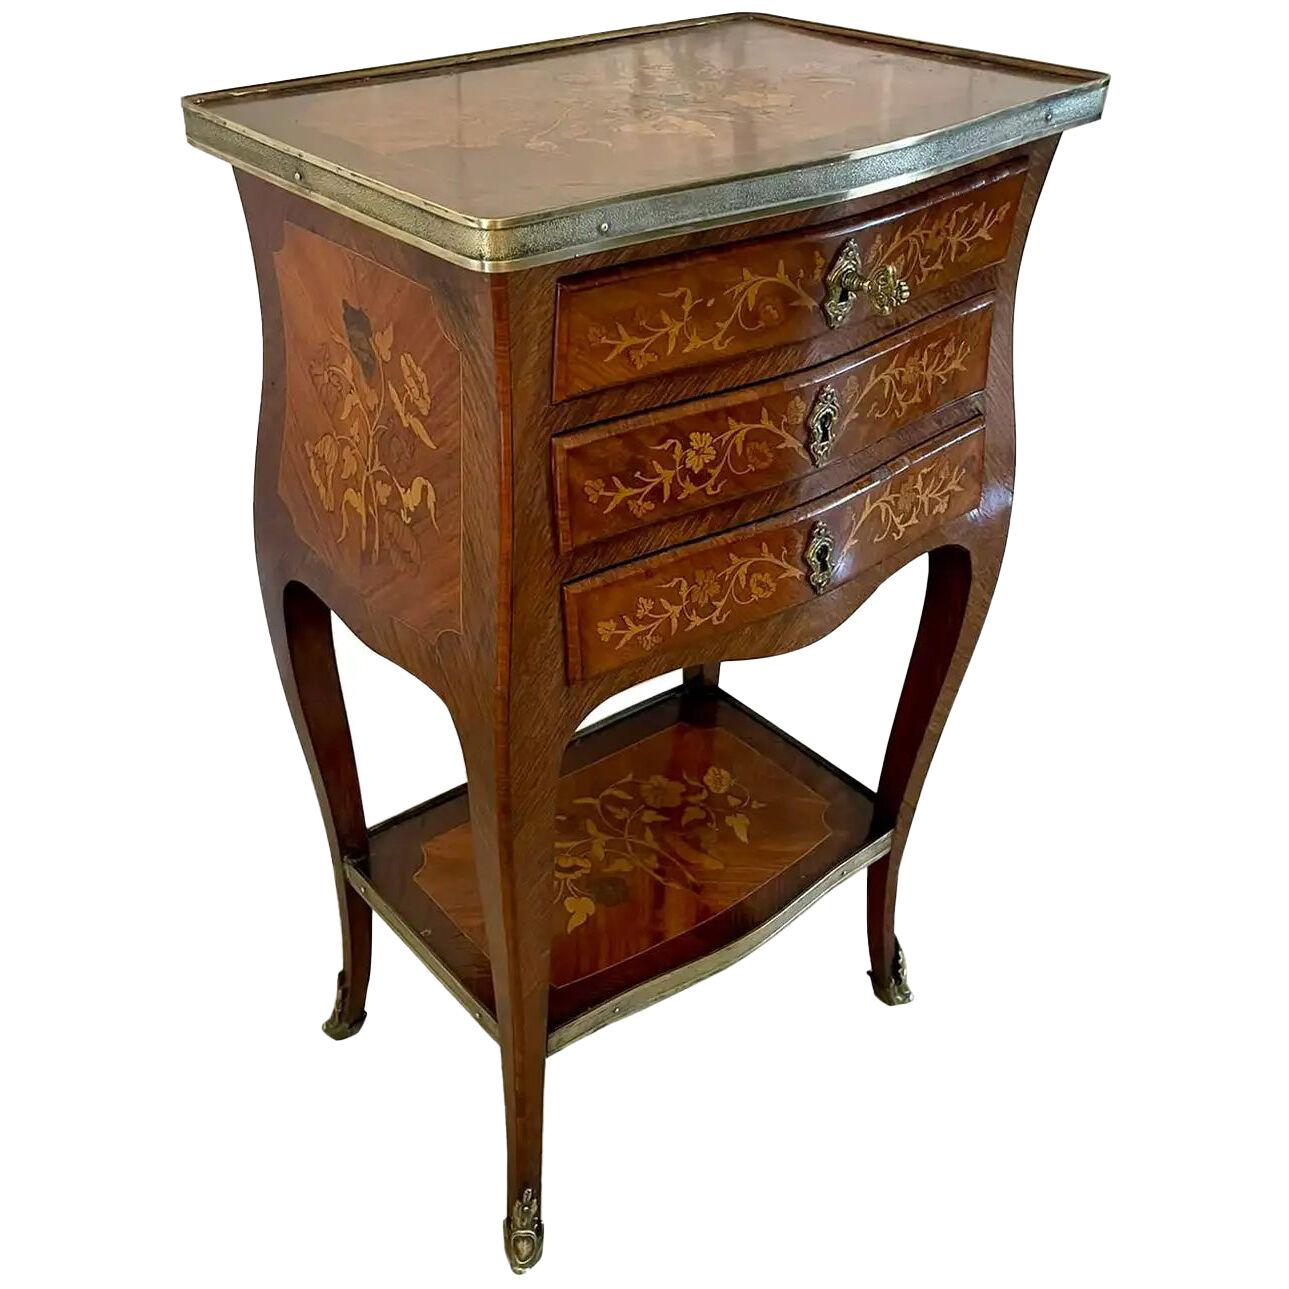 Antique Freestanding Quality Marquetry Inlaid Kingwood Chest of Drawers